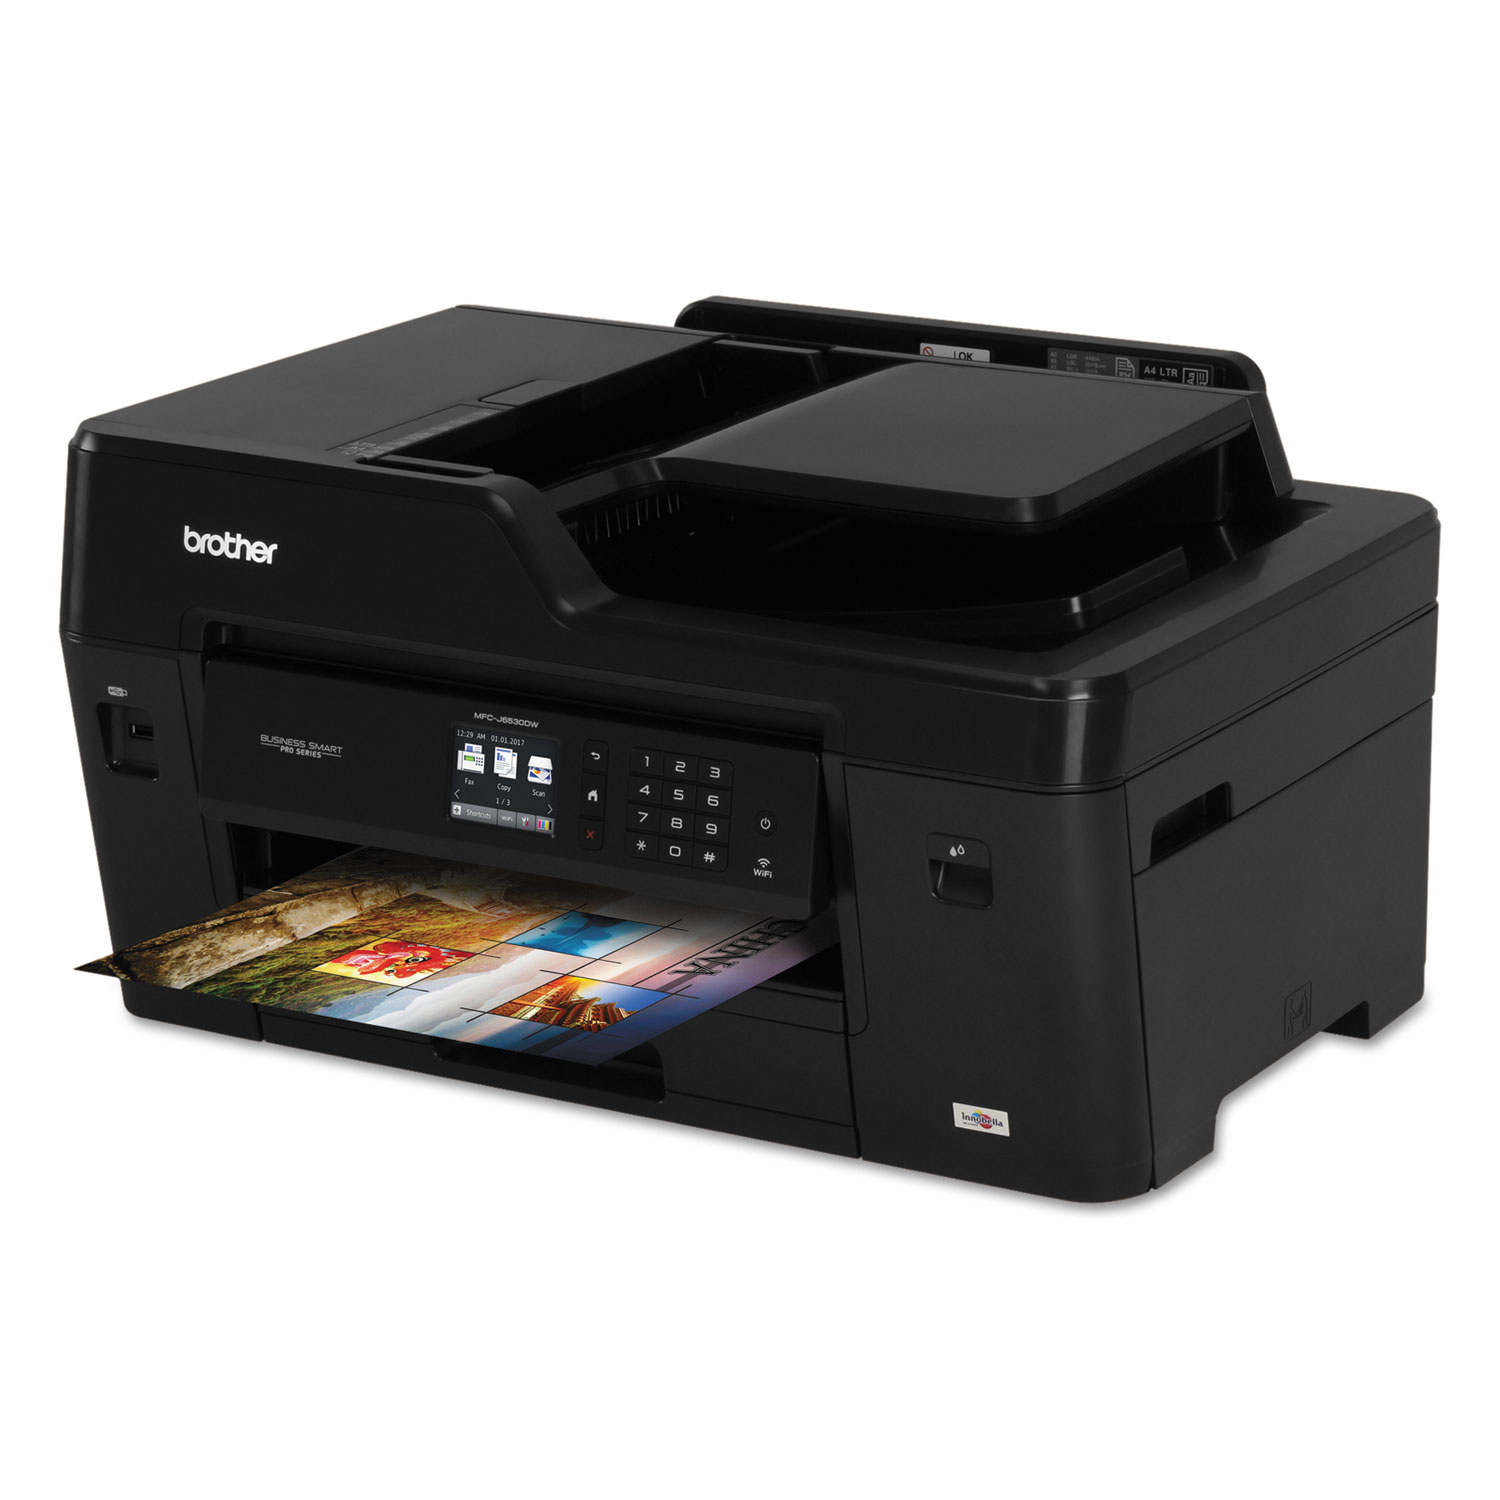 Business Smart Pro MFC-J6530DW Color All-in-One, Copy/Fax/Print/Scan